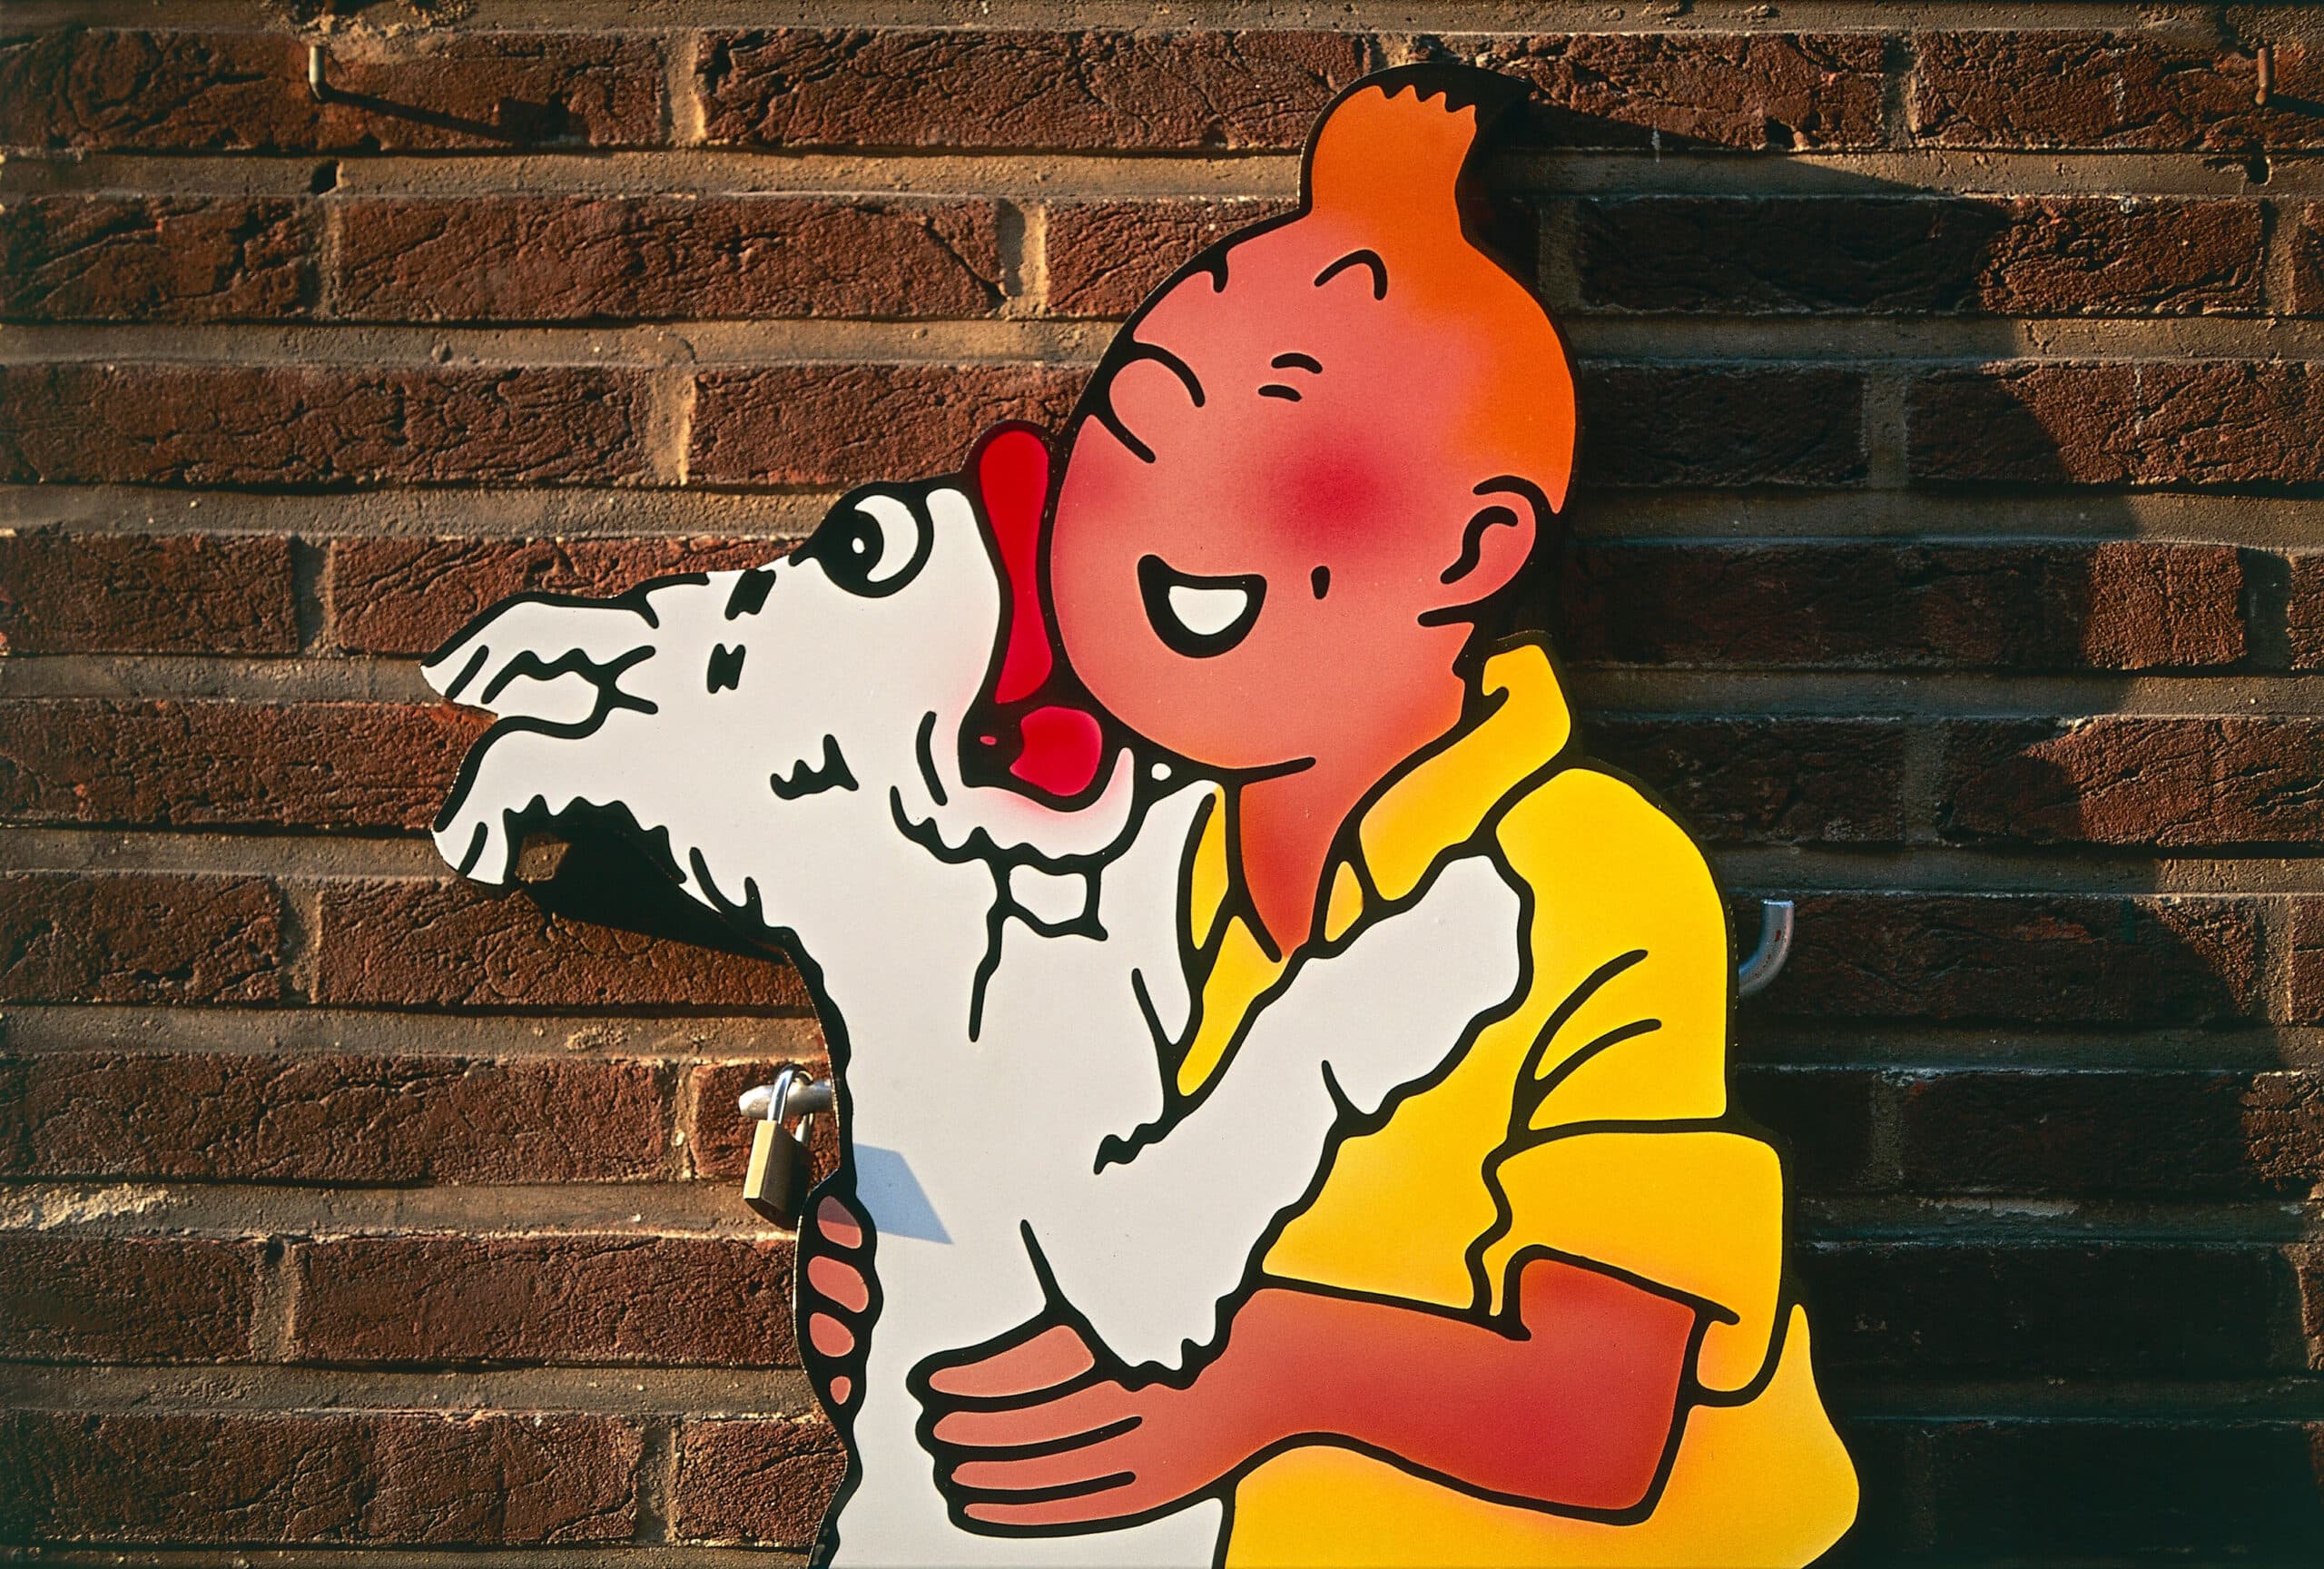 The comic figures of Tintin on a plaque in front of a brick wall